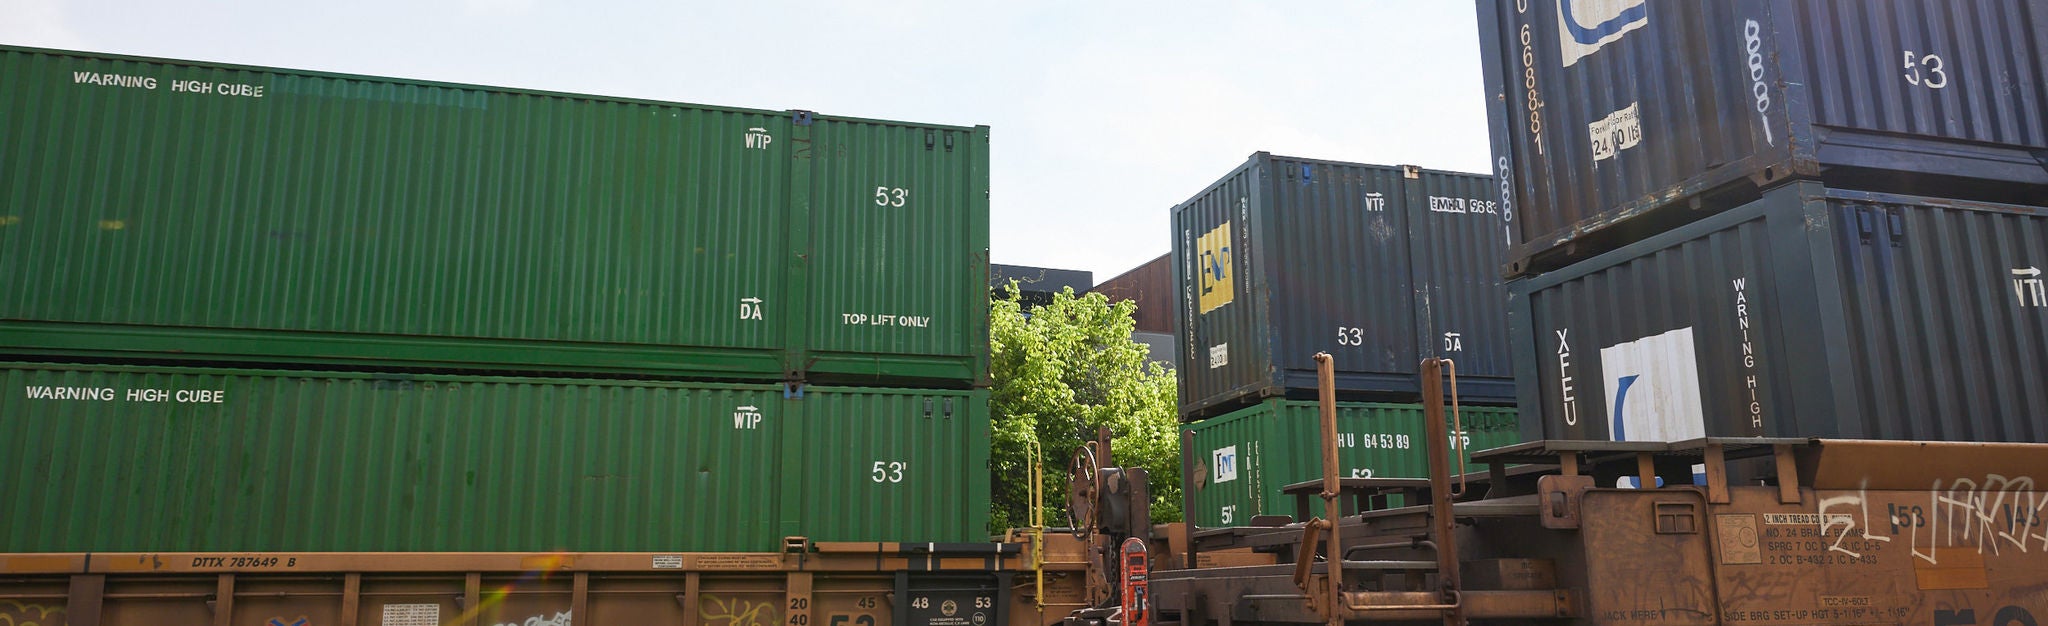 Intermodal containers railroad fuel surcharges